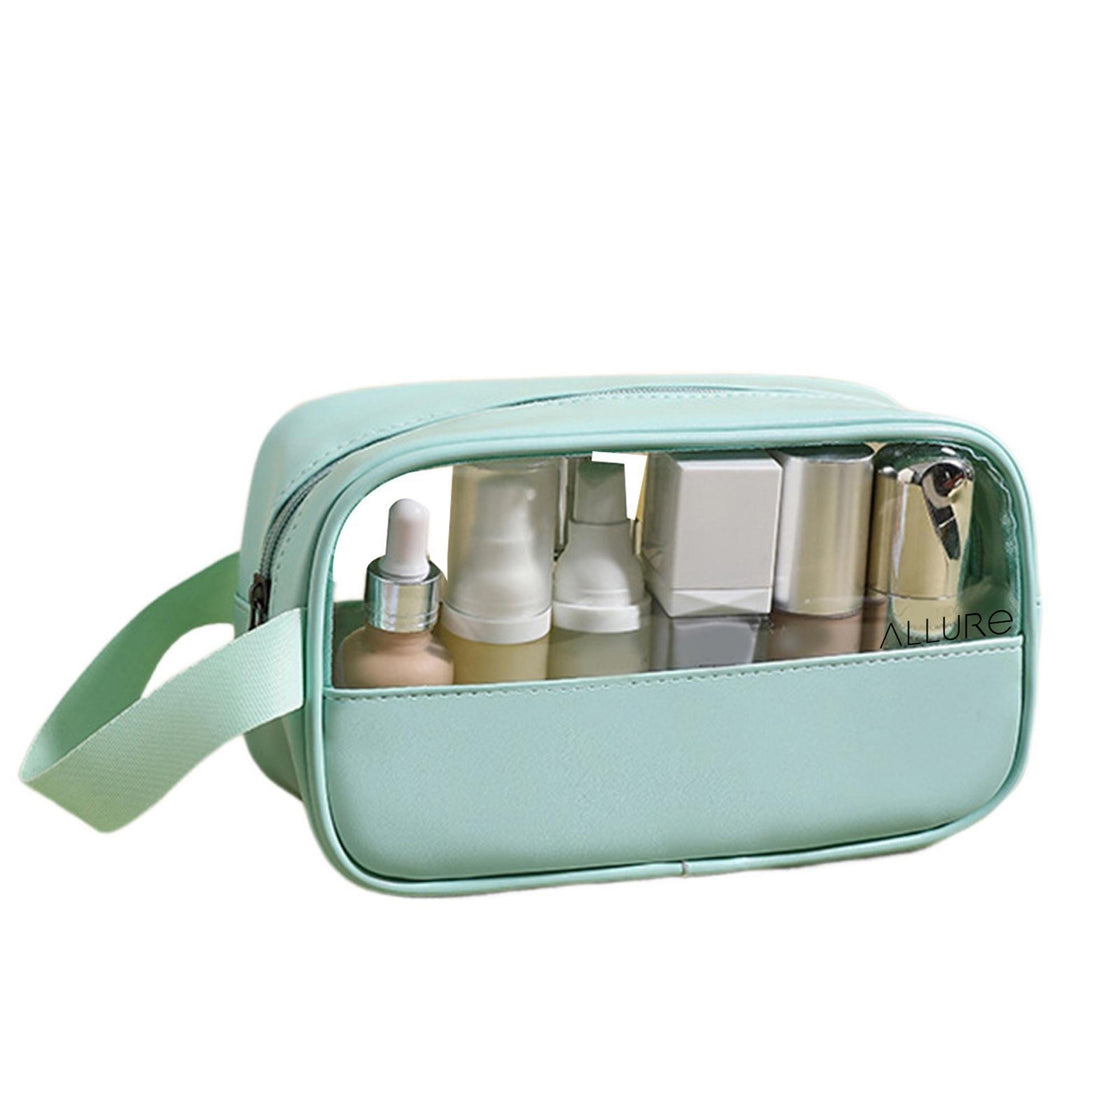 Allure Toiletry Bag Small Green